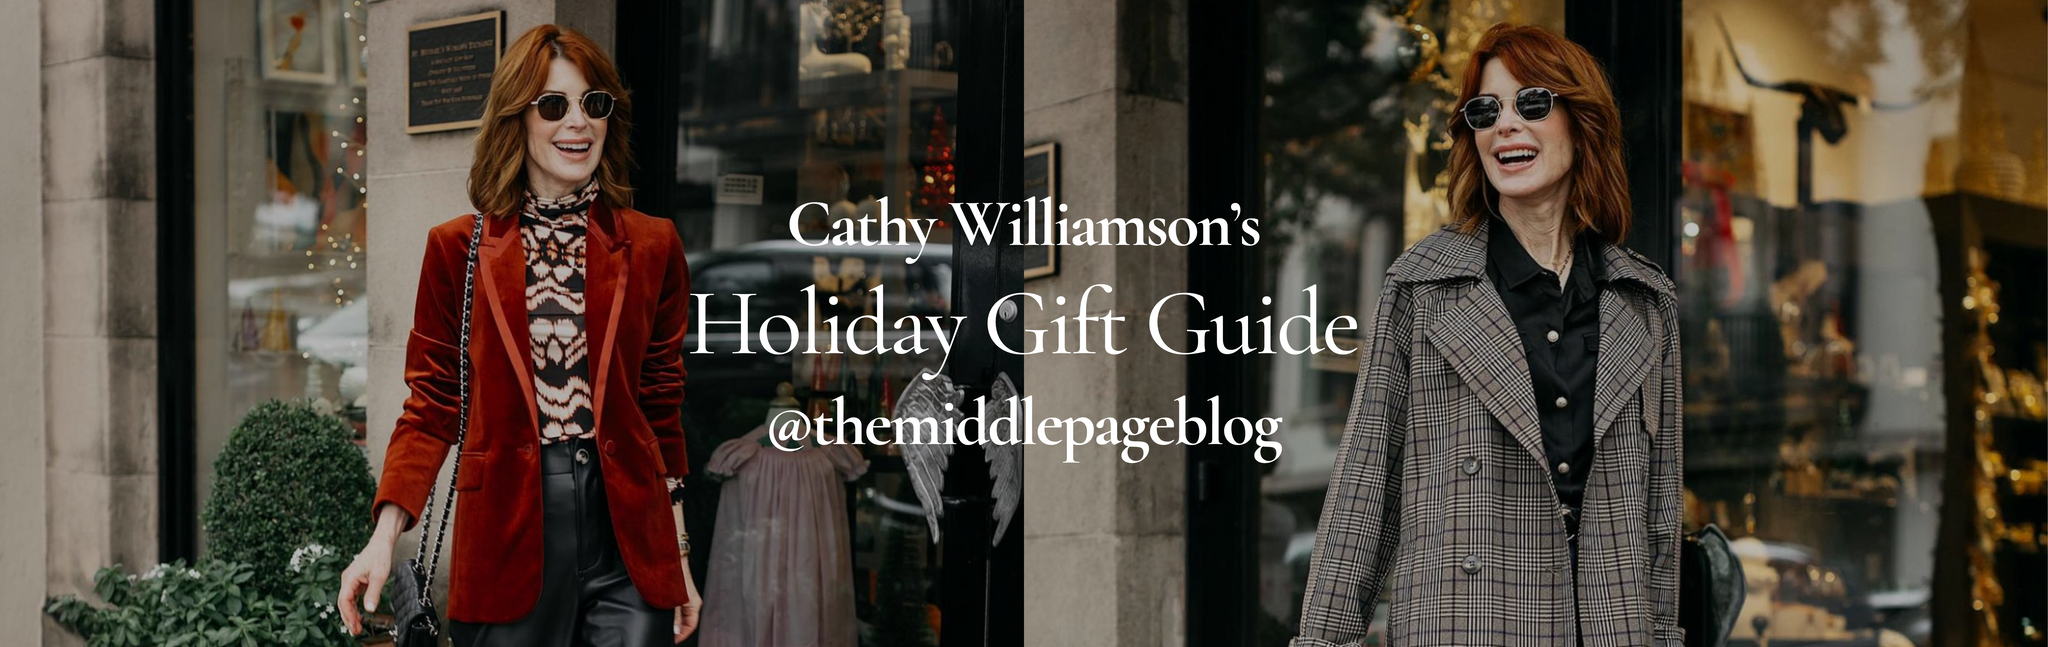 The Middle Page Blog (Cathy Williamson)